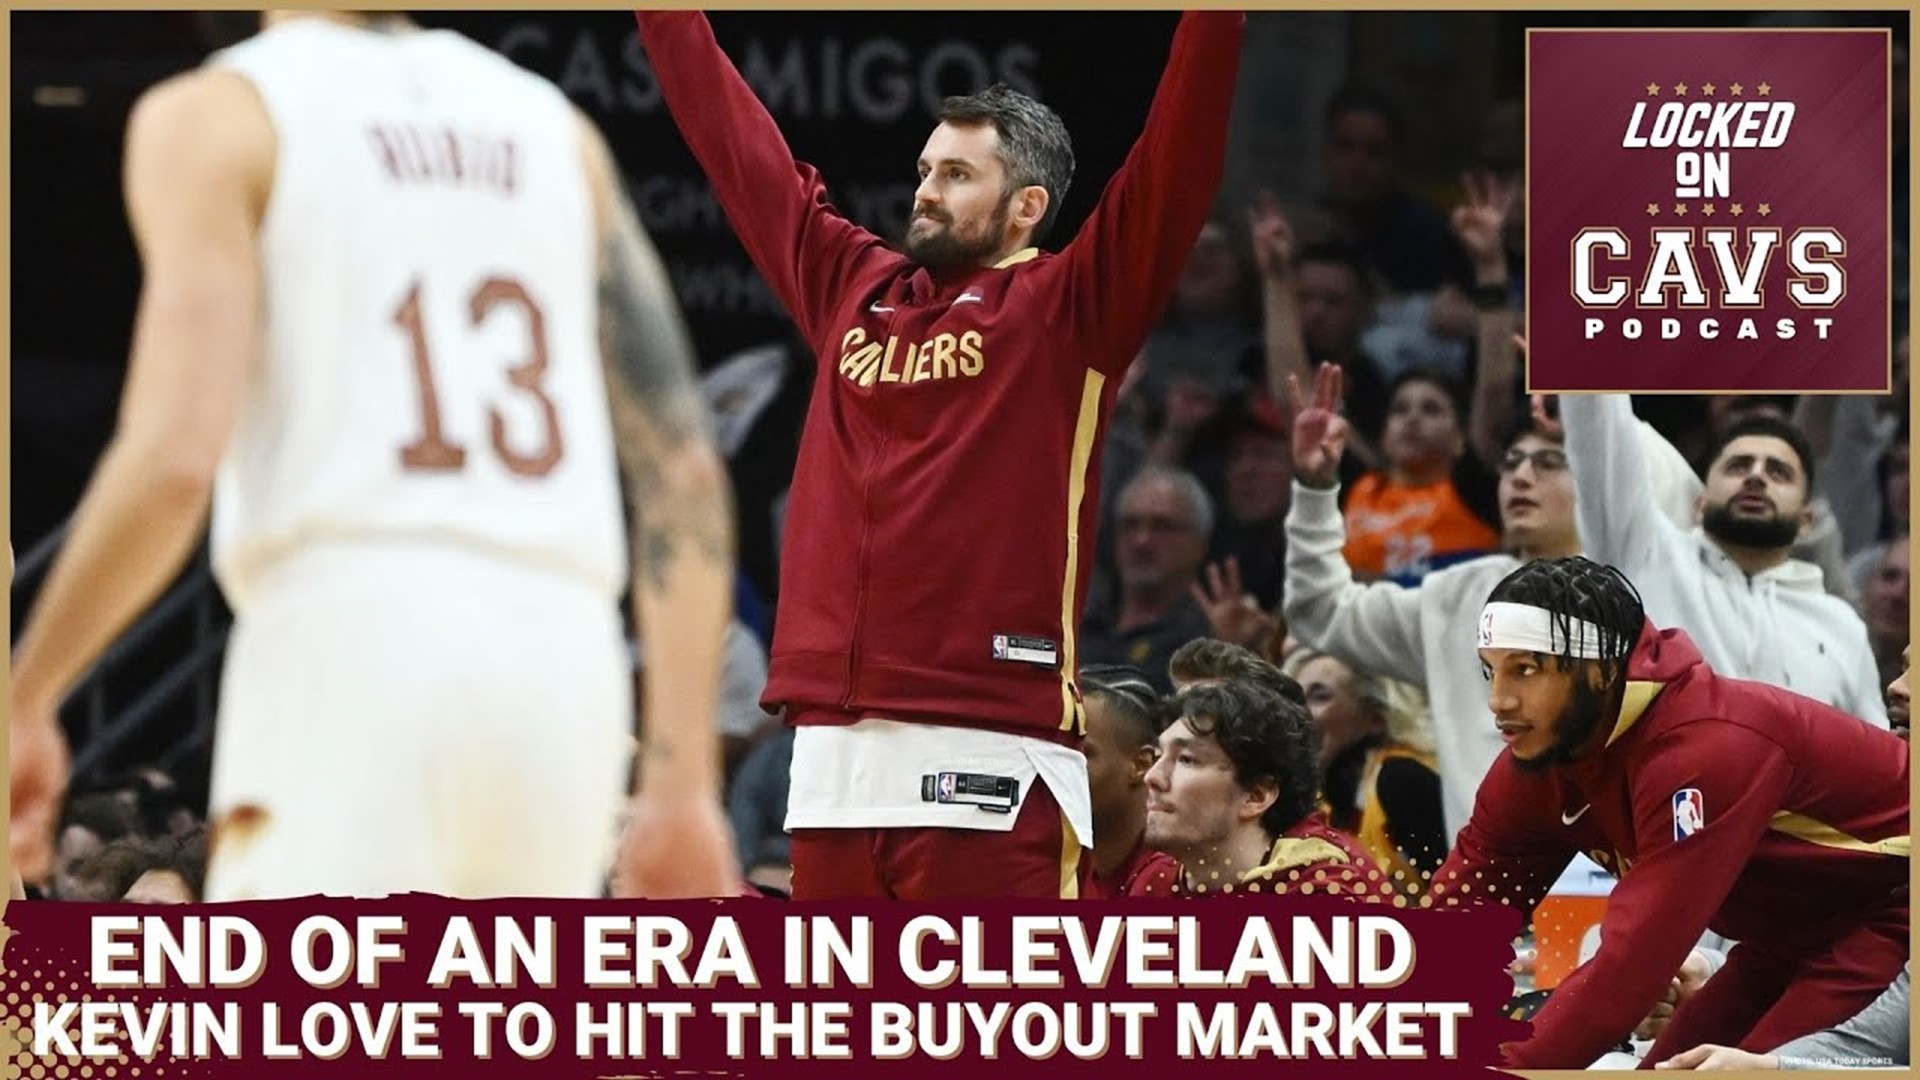 Chris Manning and Evan Dammarell talk about Kevin Love hitting the buyout market, what it means for him, what it means for the Cavs and more.